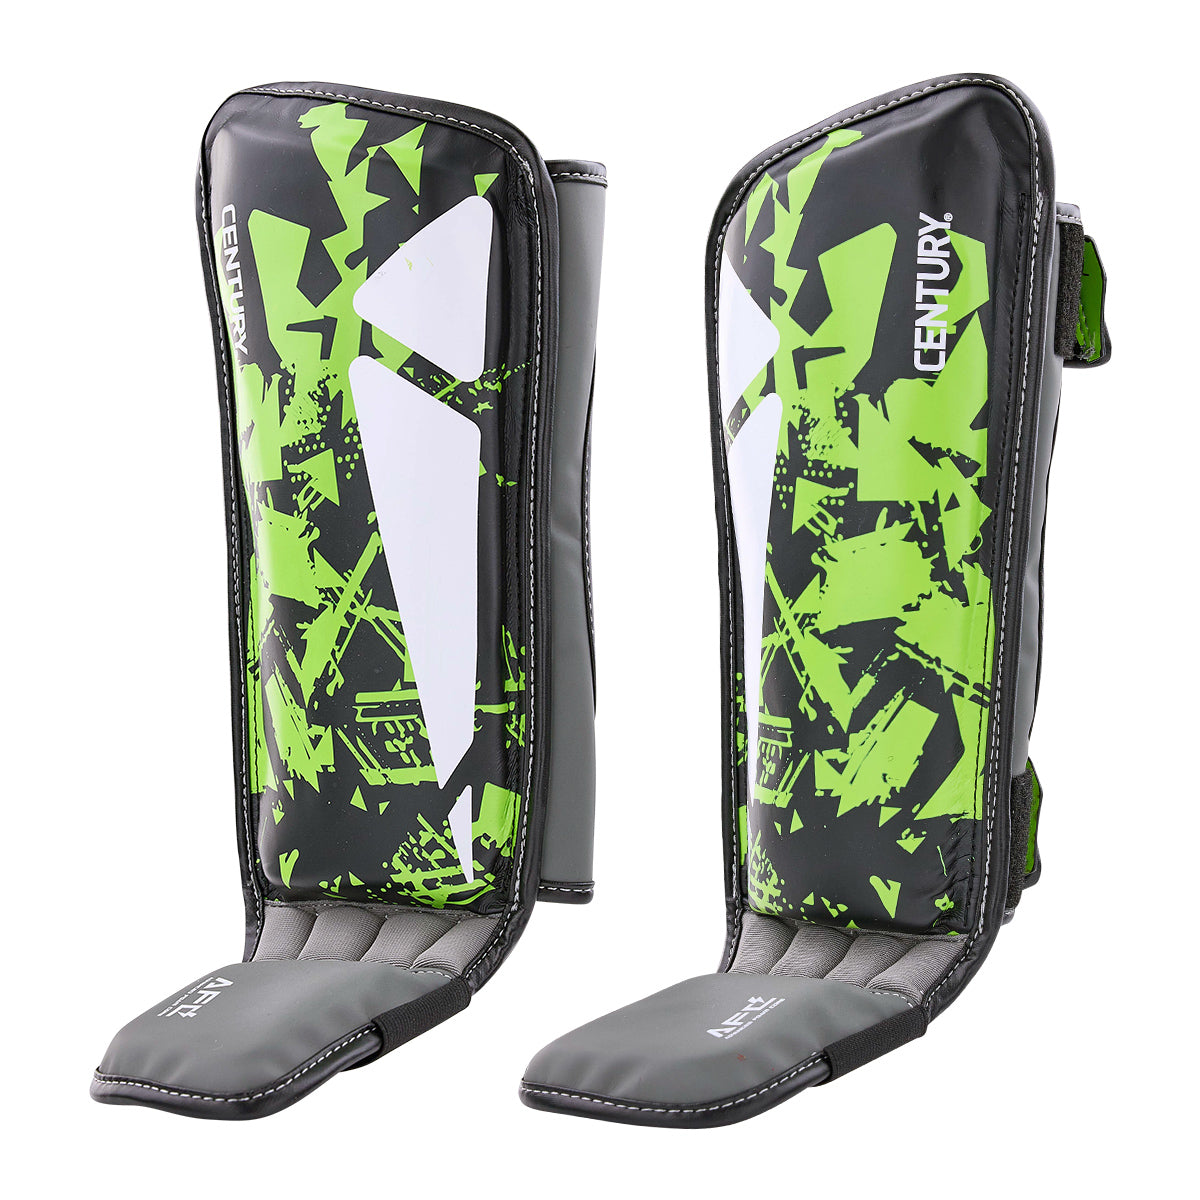 Brave Youth Shin Guards